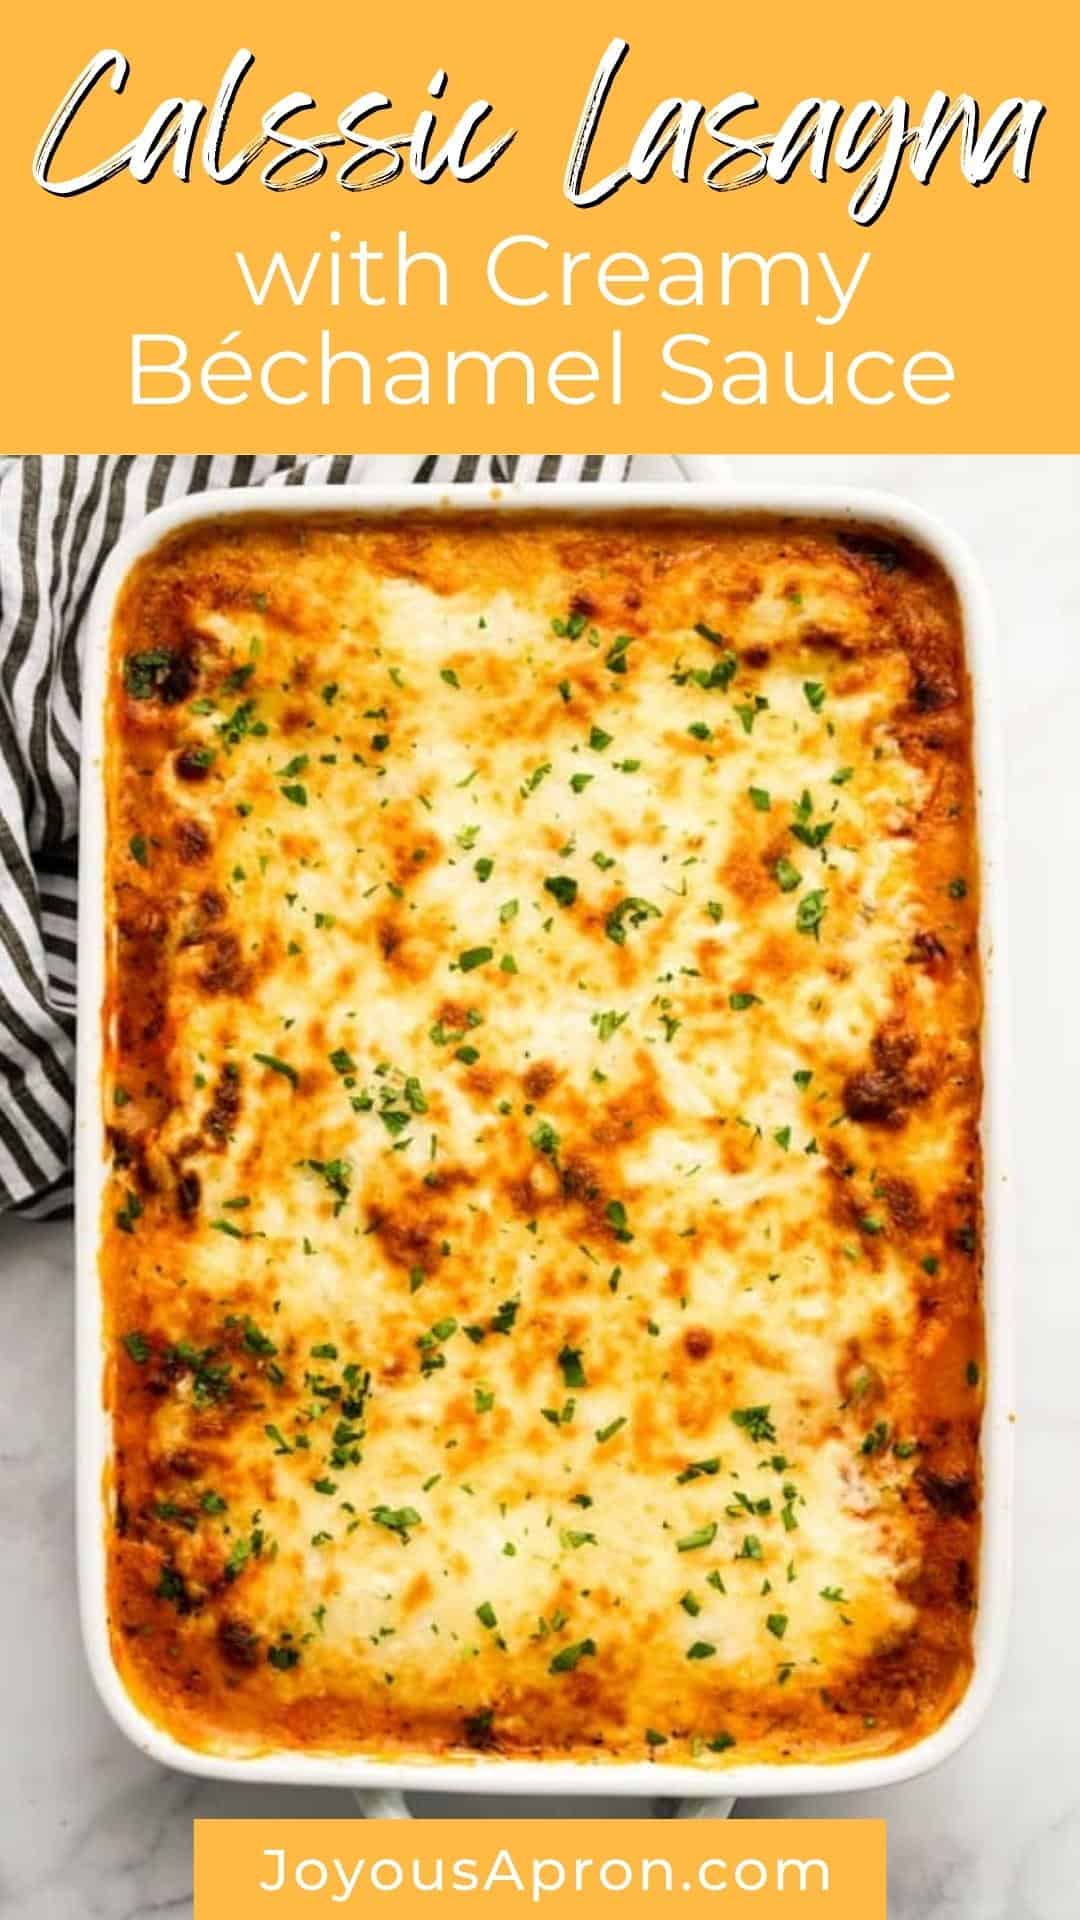 Lasagna Recipe - A traditional Italian pasta recipe layered with béchamel sauce, bolognese sauce, no-boil lasagna sheet and mozzarella cheese. Authentic recipe, delicious and makes the perfect dinner. via @joyousapron